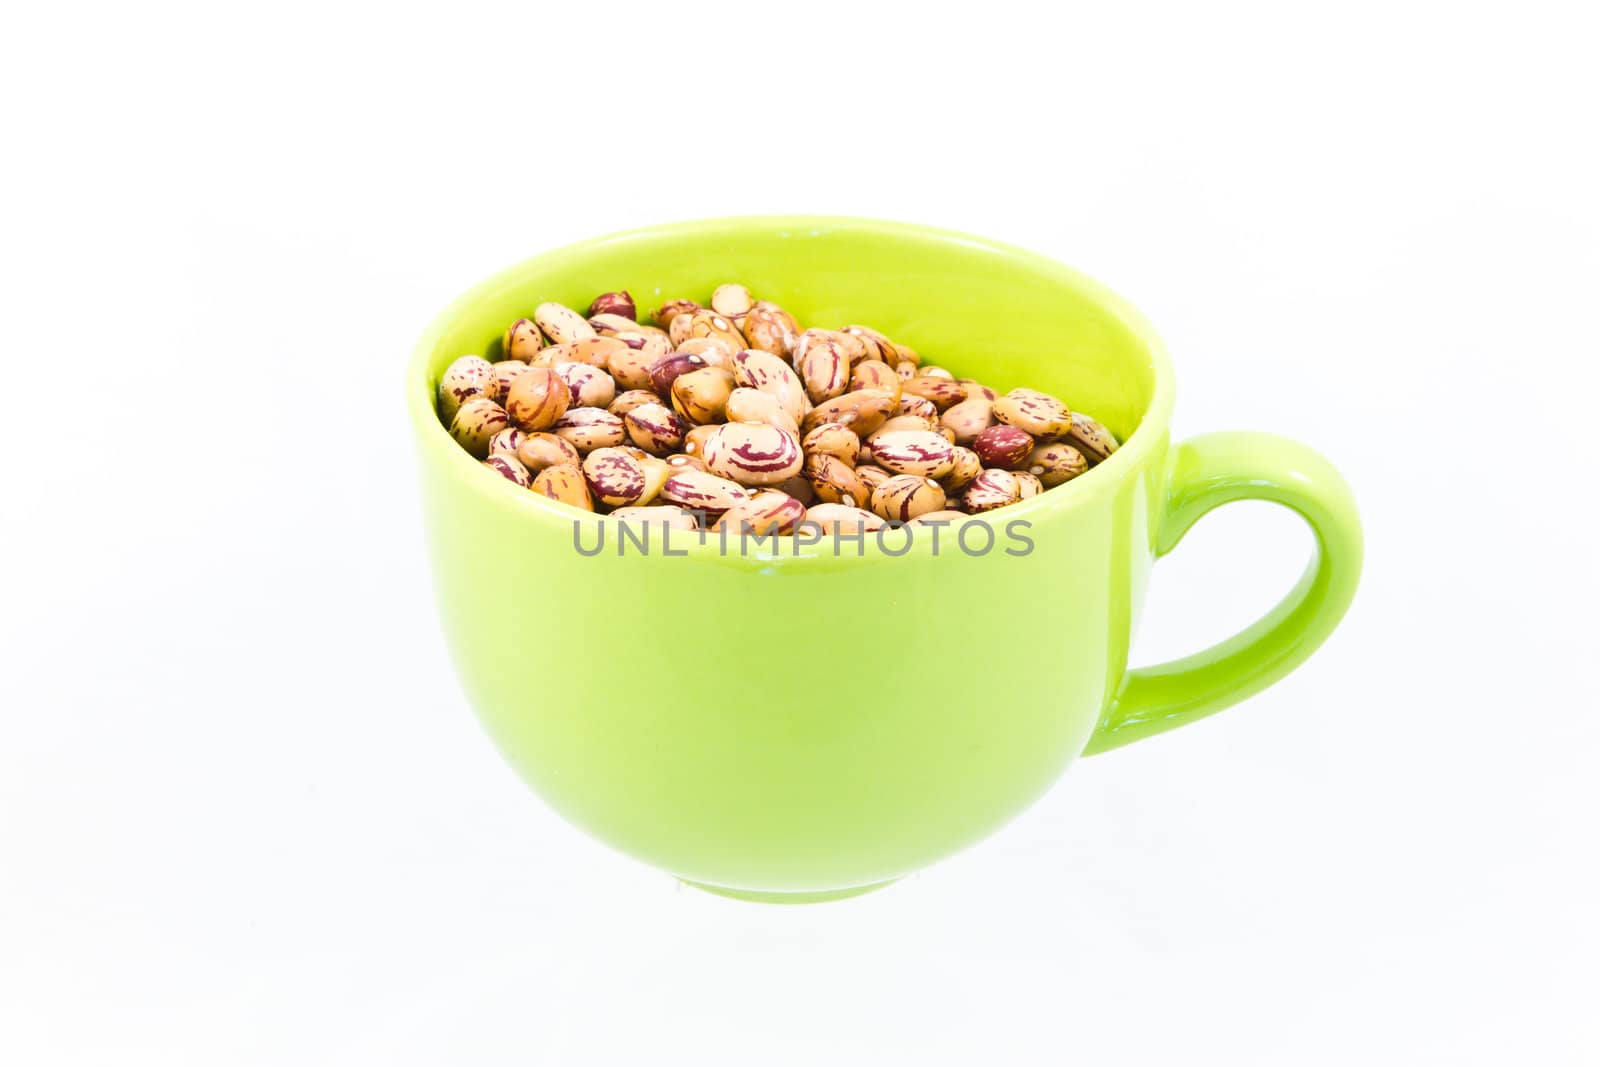 Many uncooked beans in cup